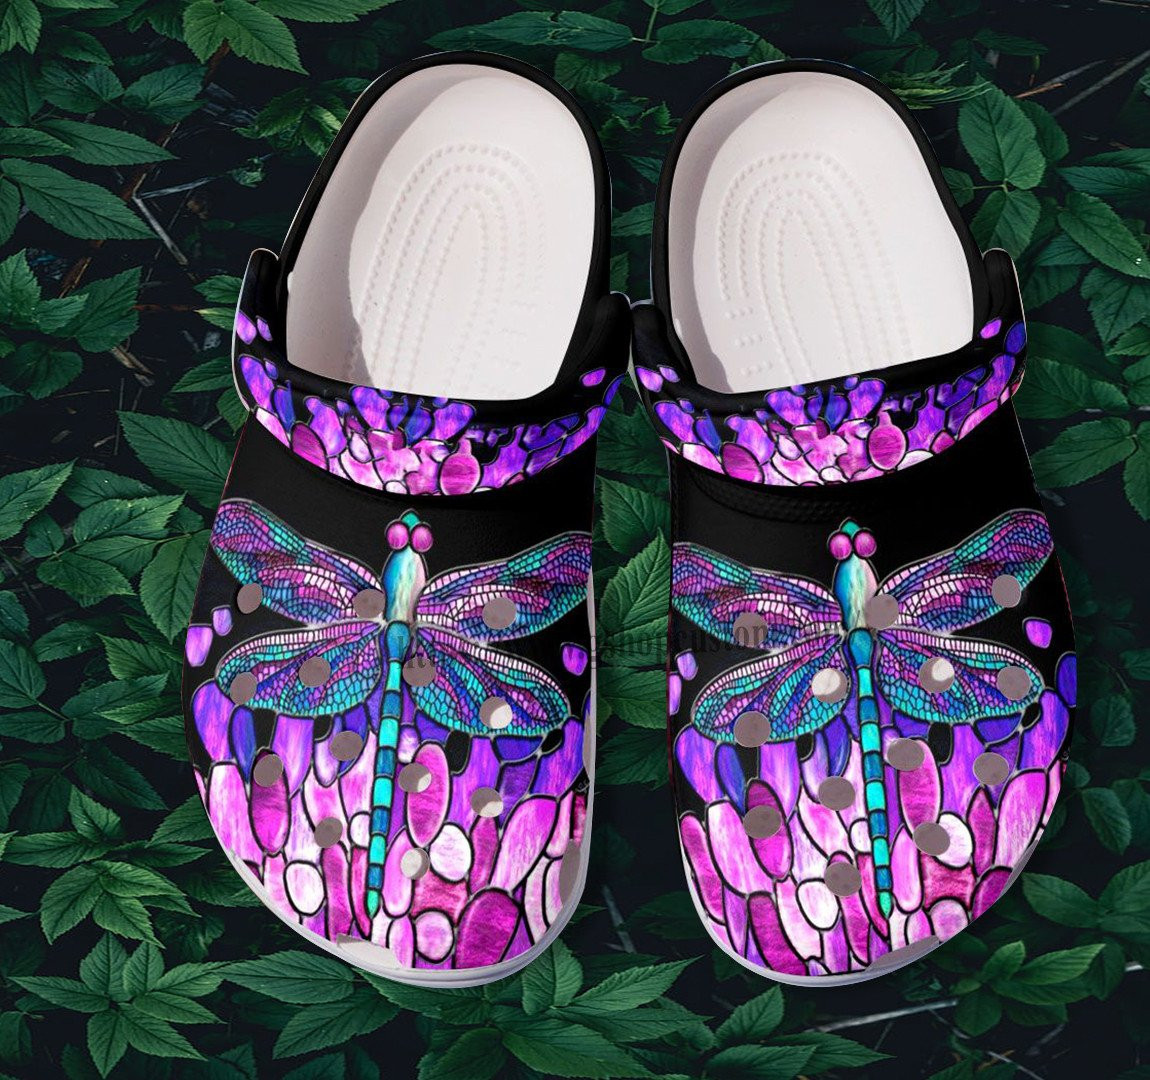 Hippie Dragonfly Purple Crocs Shoes - Dragonfly Twinkle Hippie Croc Clogs Shoes Gift Birthday